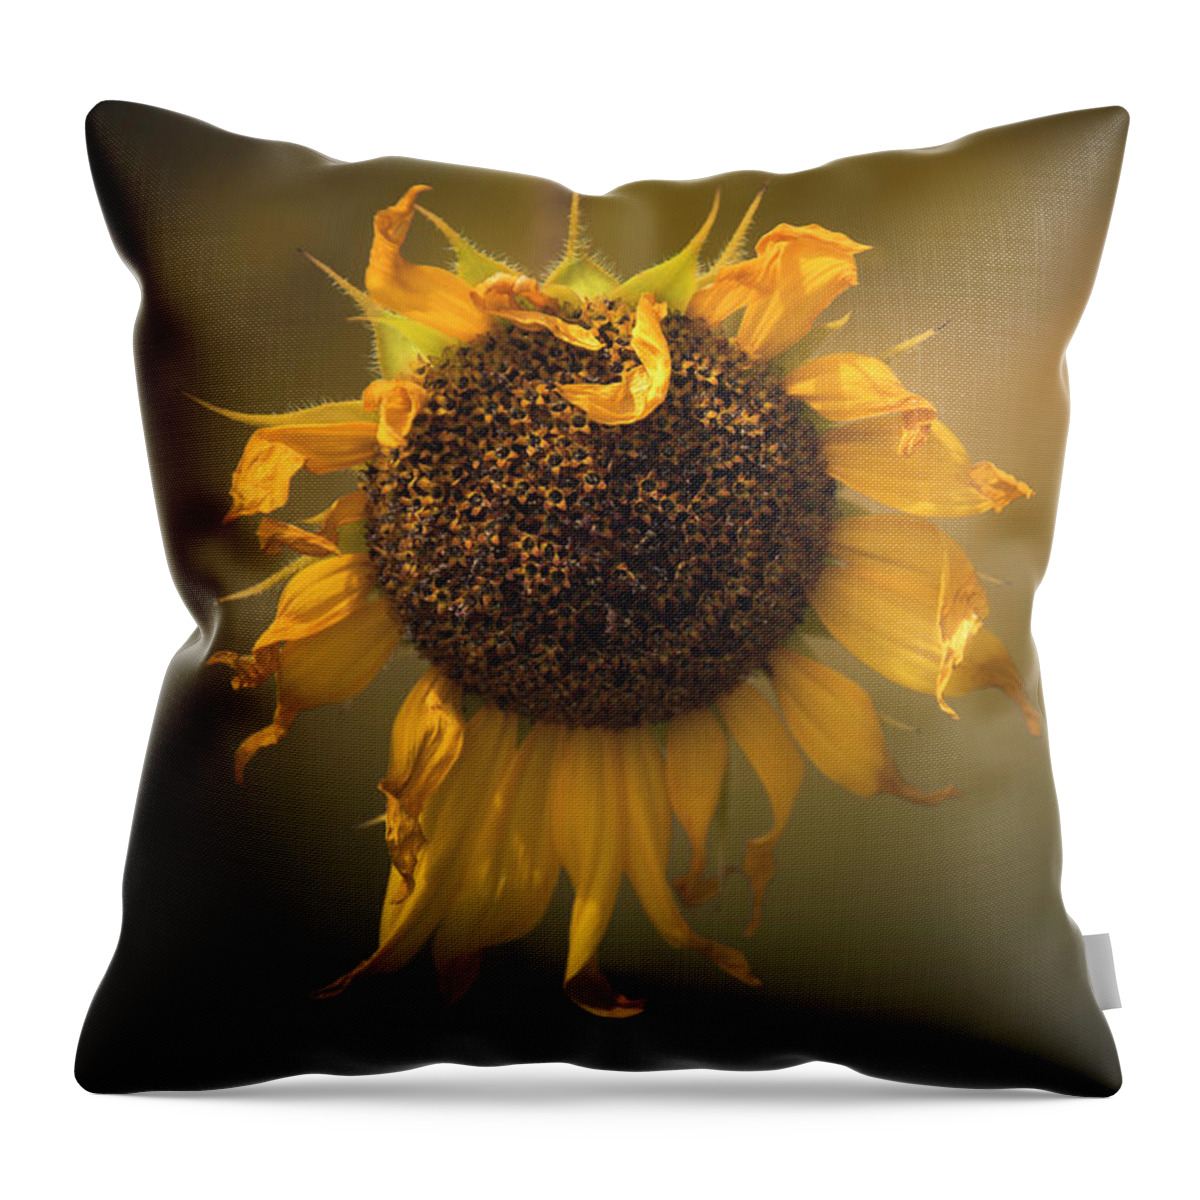 Sunflower Throw Pillow featuring the photograph Spent Sunflower by The Forests Edge Photography - Diane Sandoval